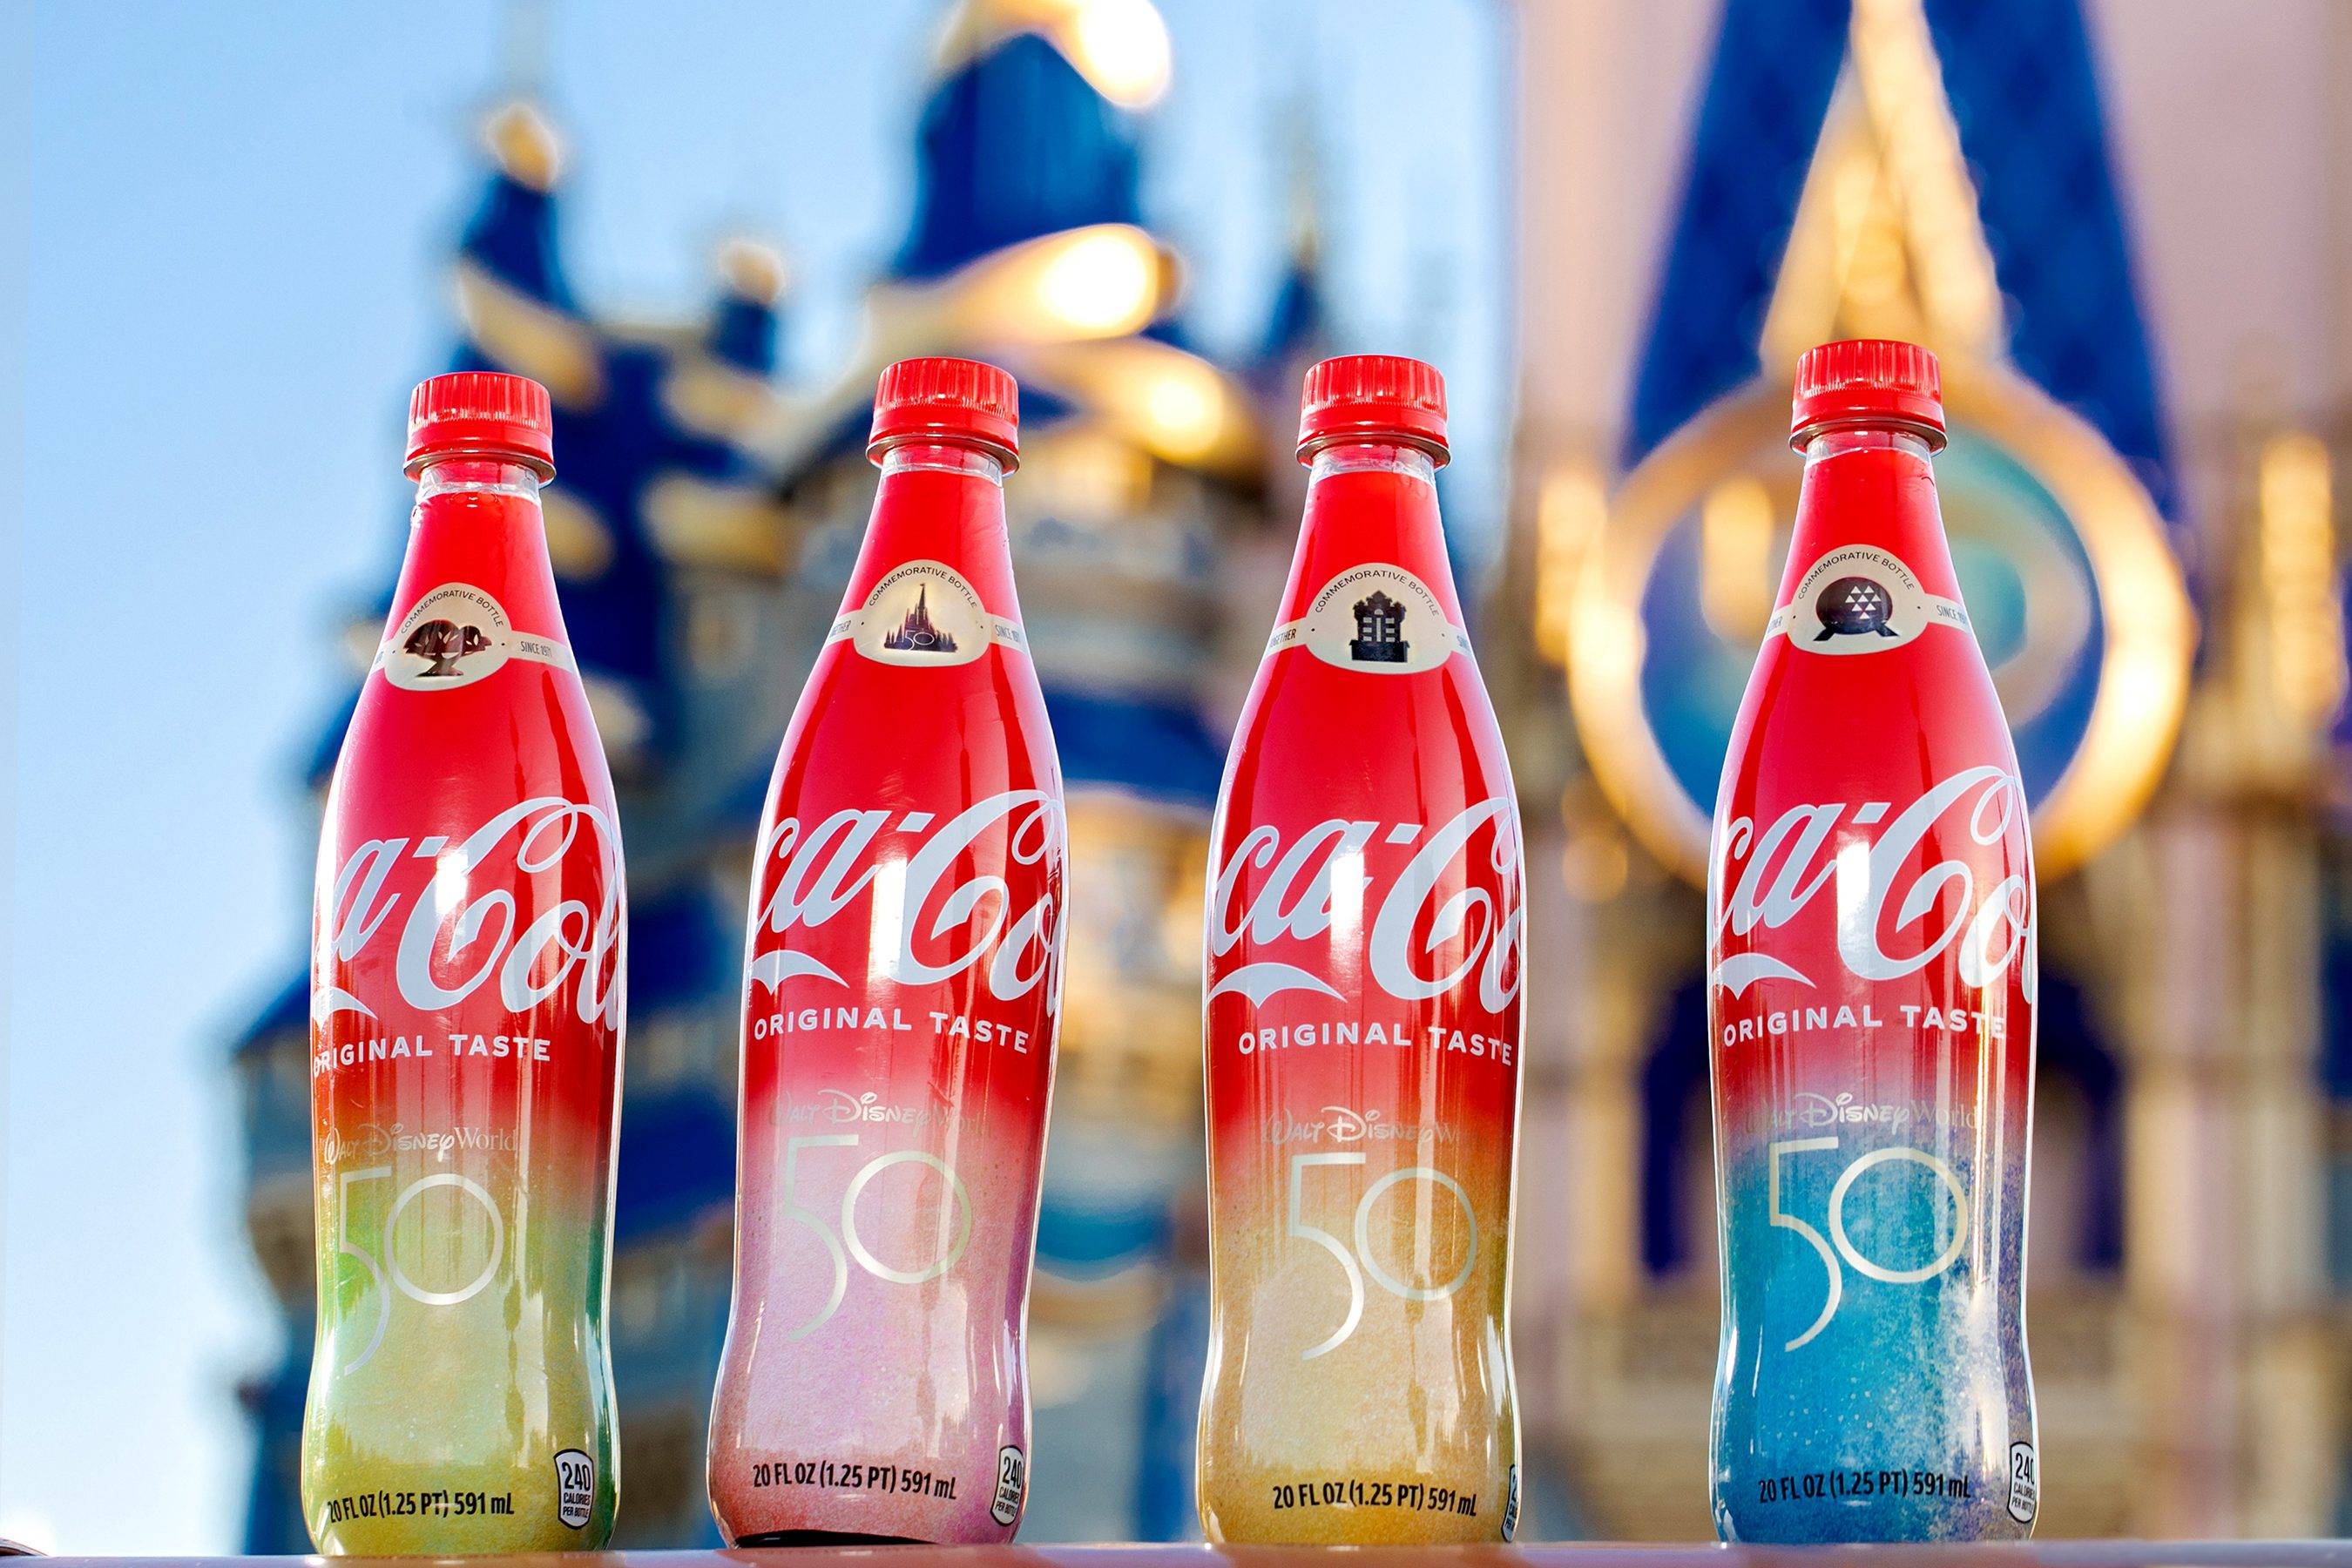 Coca-Cola Bottles for the 50th Anniversary of Walt Disney World